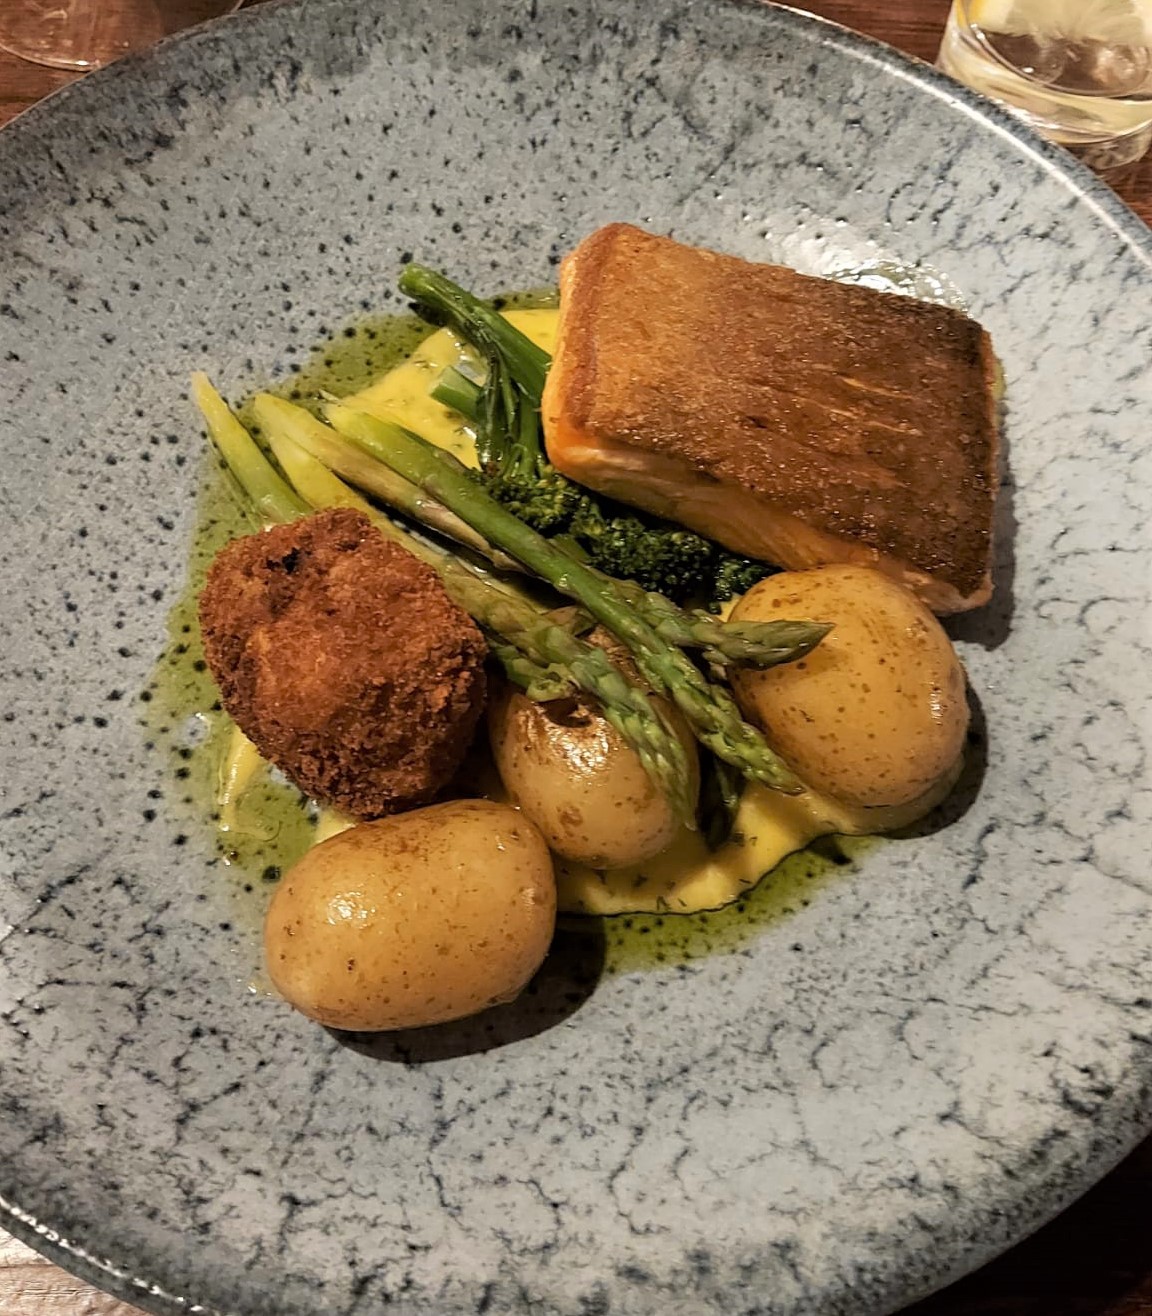 The Hideout Bistro & Bar, Rossett - pan fried Scottish salmon supreme with wilted spinach, dressed new potatoes, asparagus, crispy coated egg and dill hollandaise sauce.